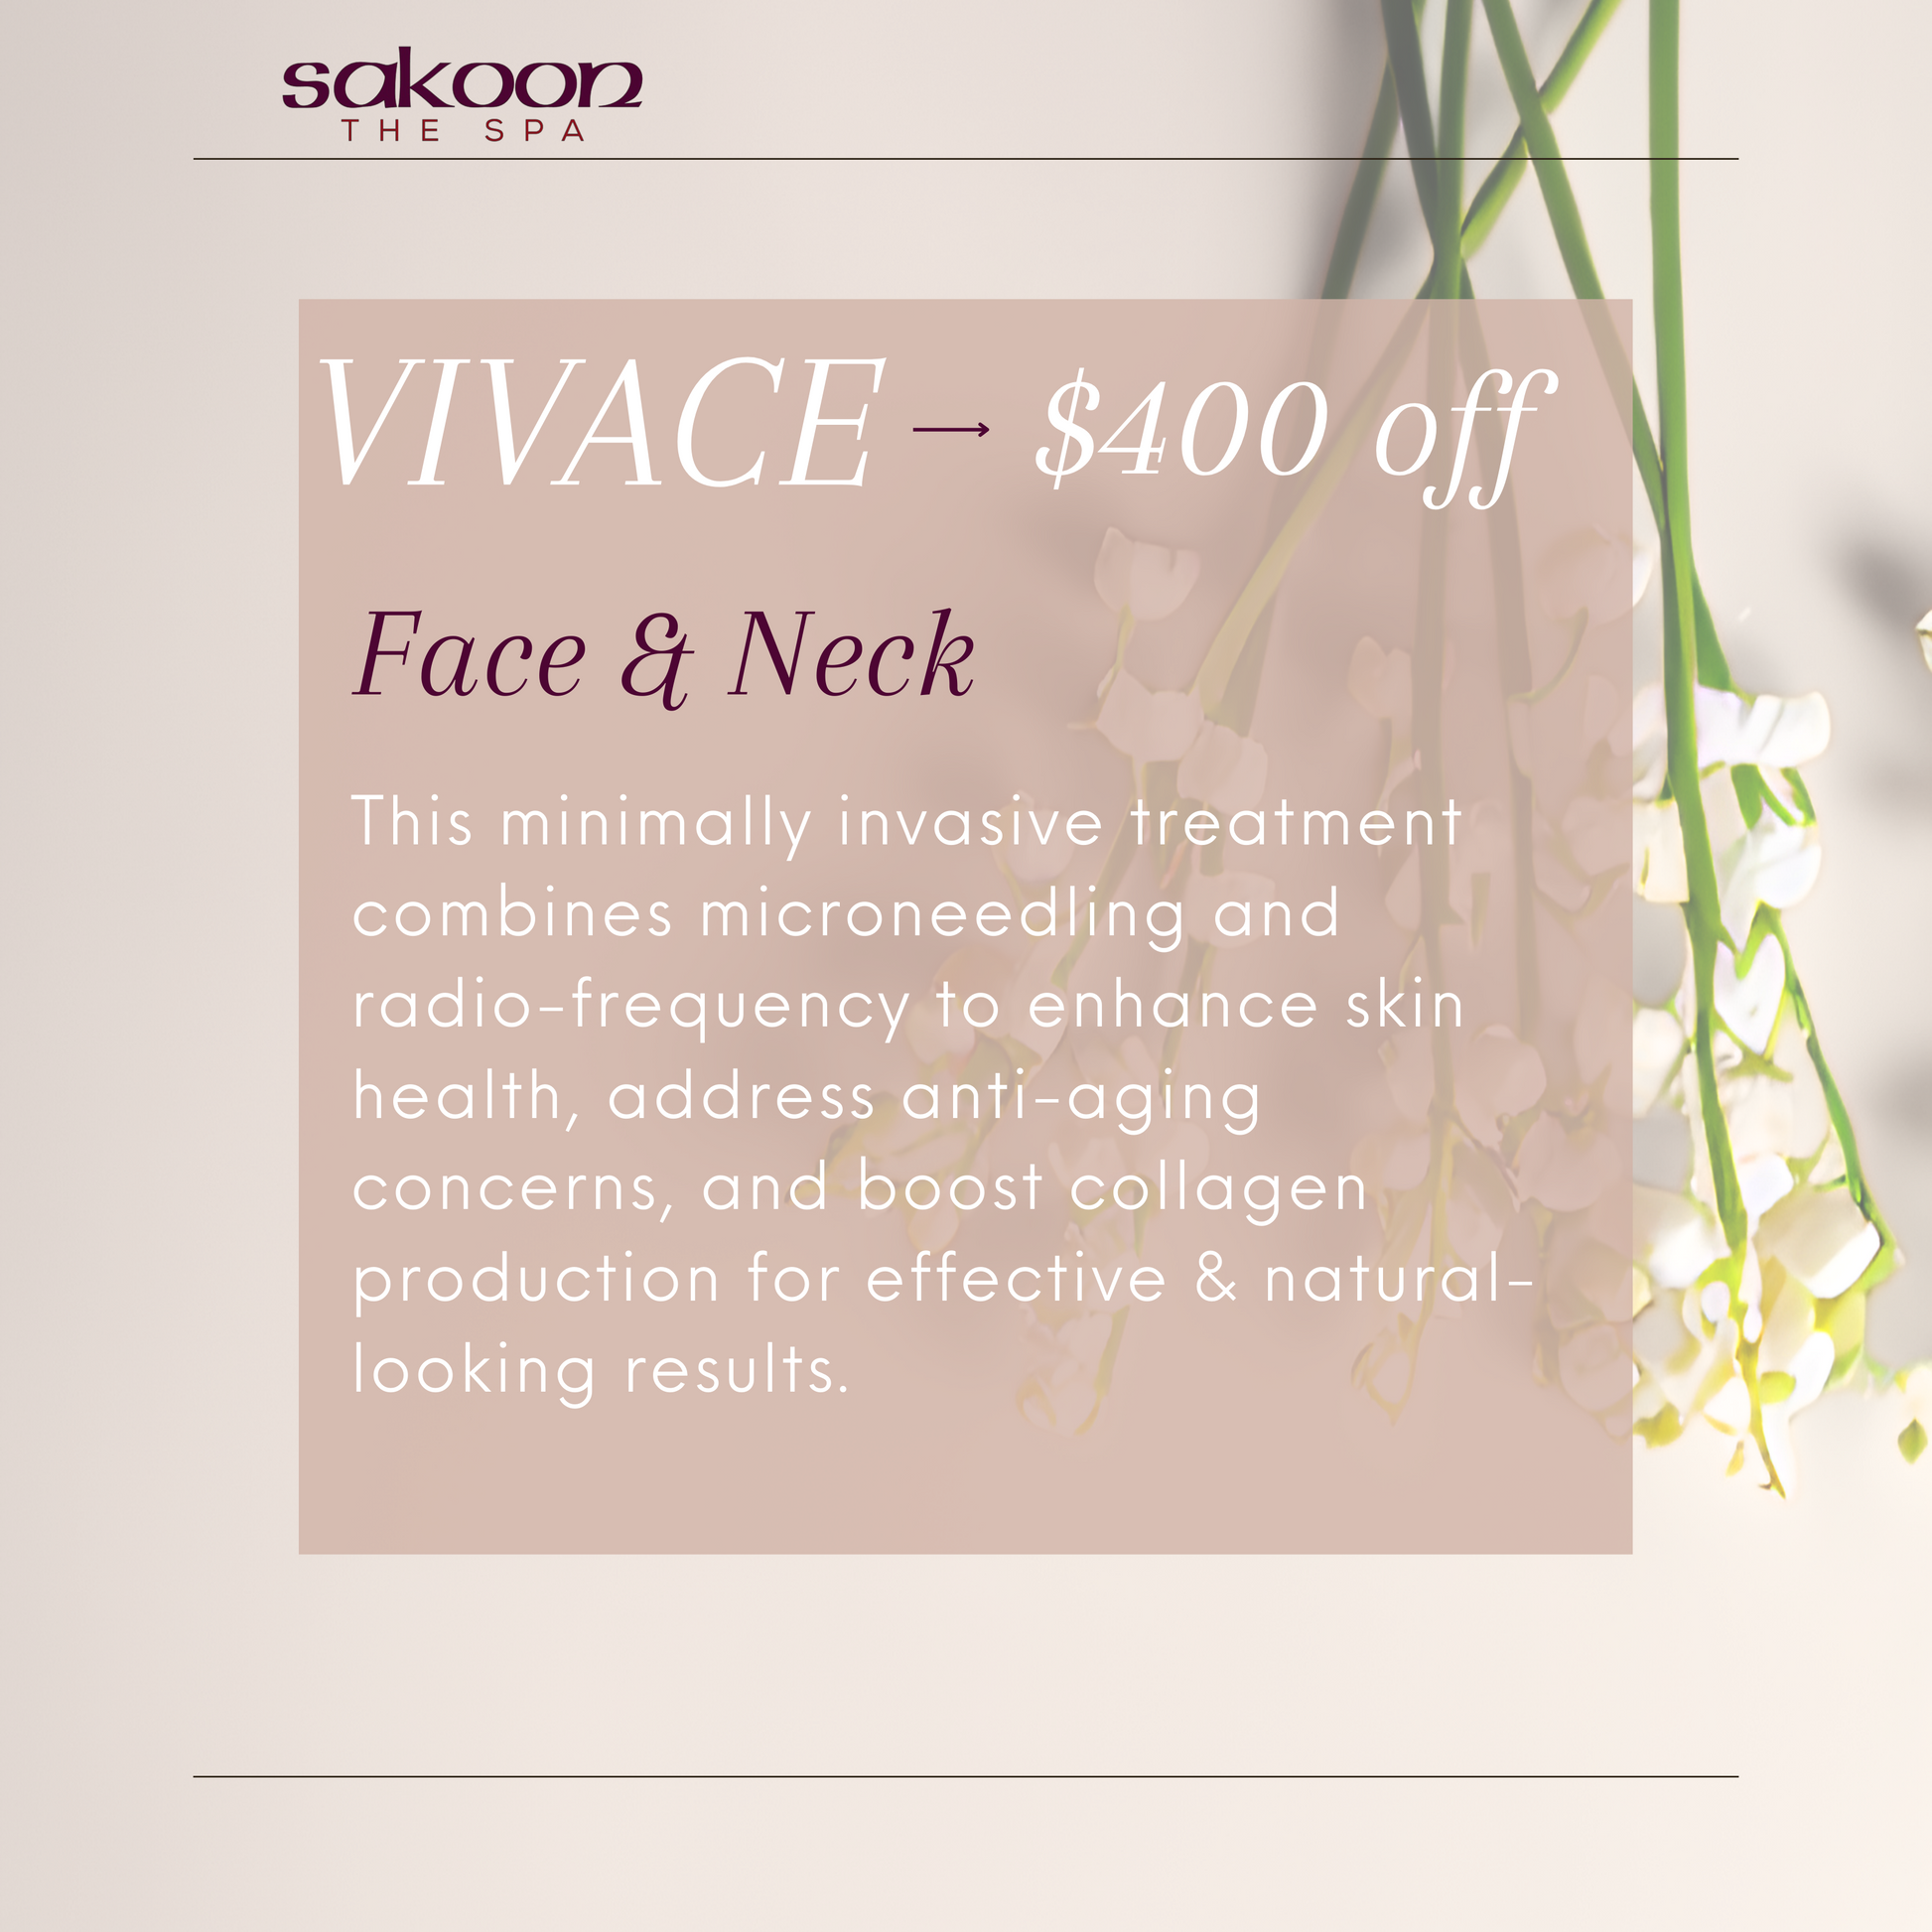 Medical spa sale for Vivace RF microneedling at Sakoon The Spa in Omaha, Nebraska. Vivace is used to target anti-aging concerns, improve skin health, and increase collagen production.